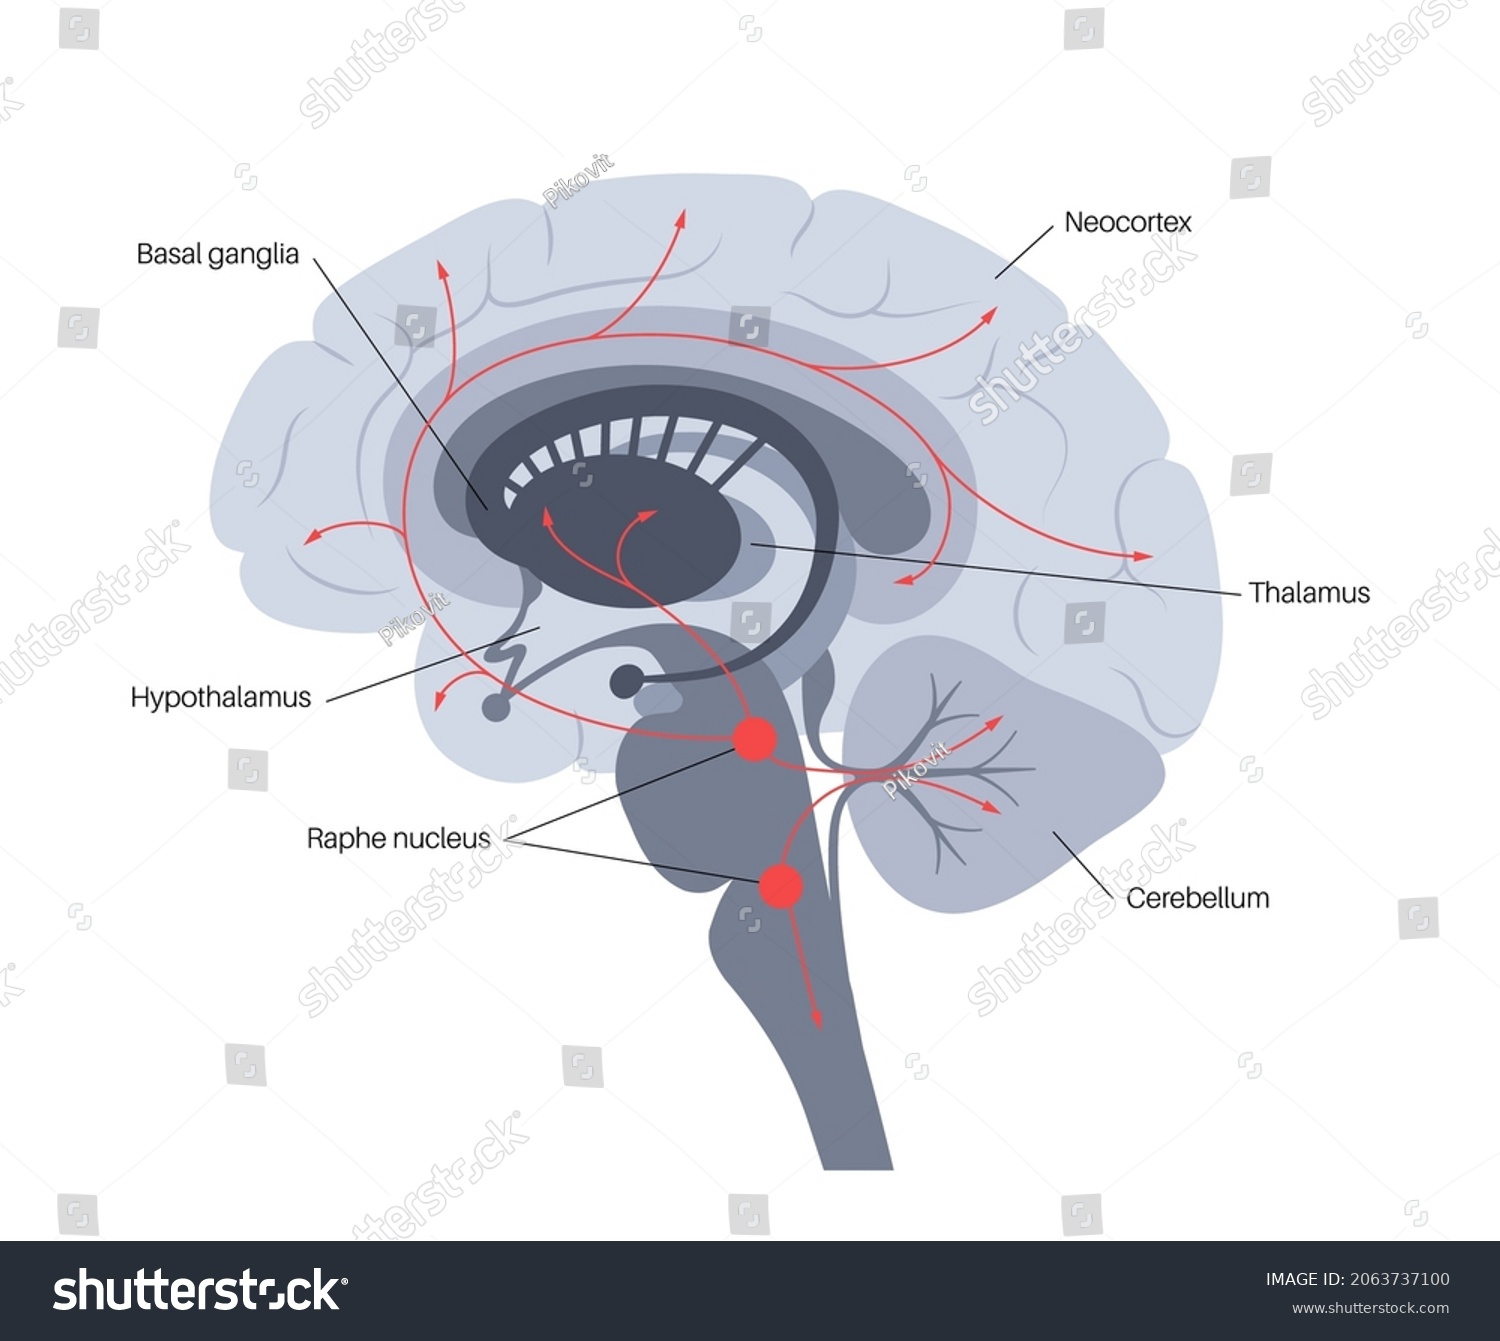 SVG of Serotonin pathway in the human brain. Monoamine neurotransmitter. Modulating mood, cognition, reward, learning, memory, and numerous physiological processes. Medical poster flat vector illustration. svg